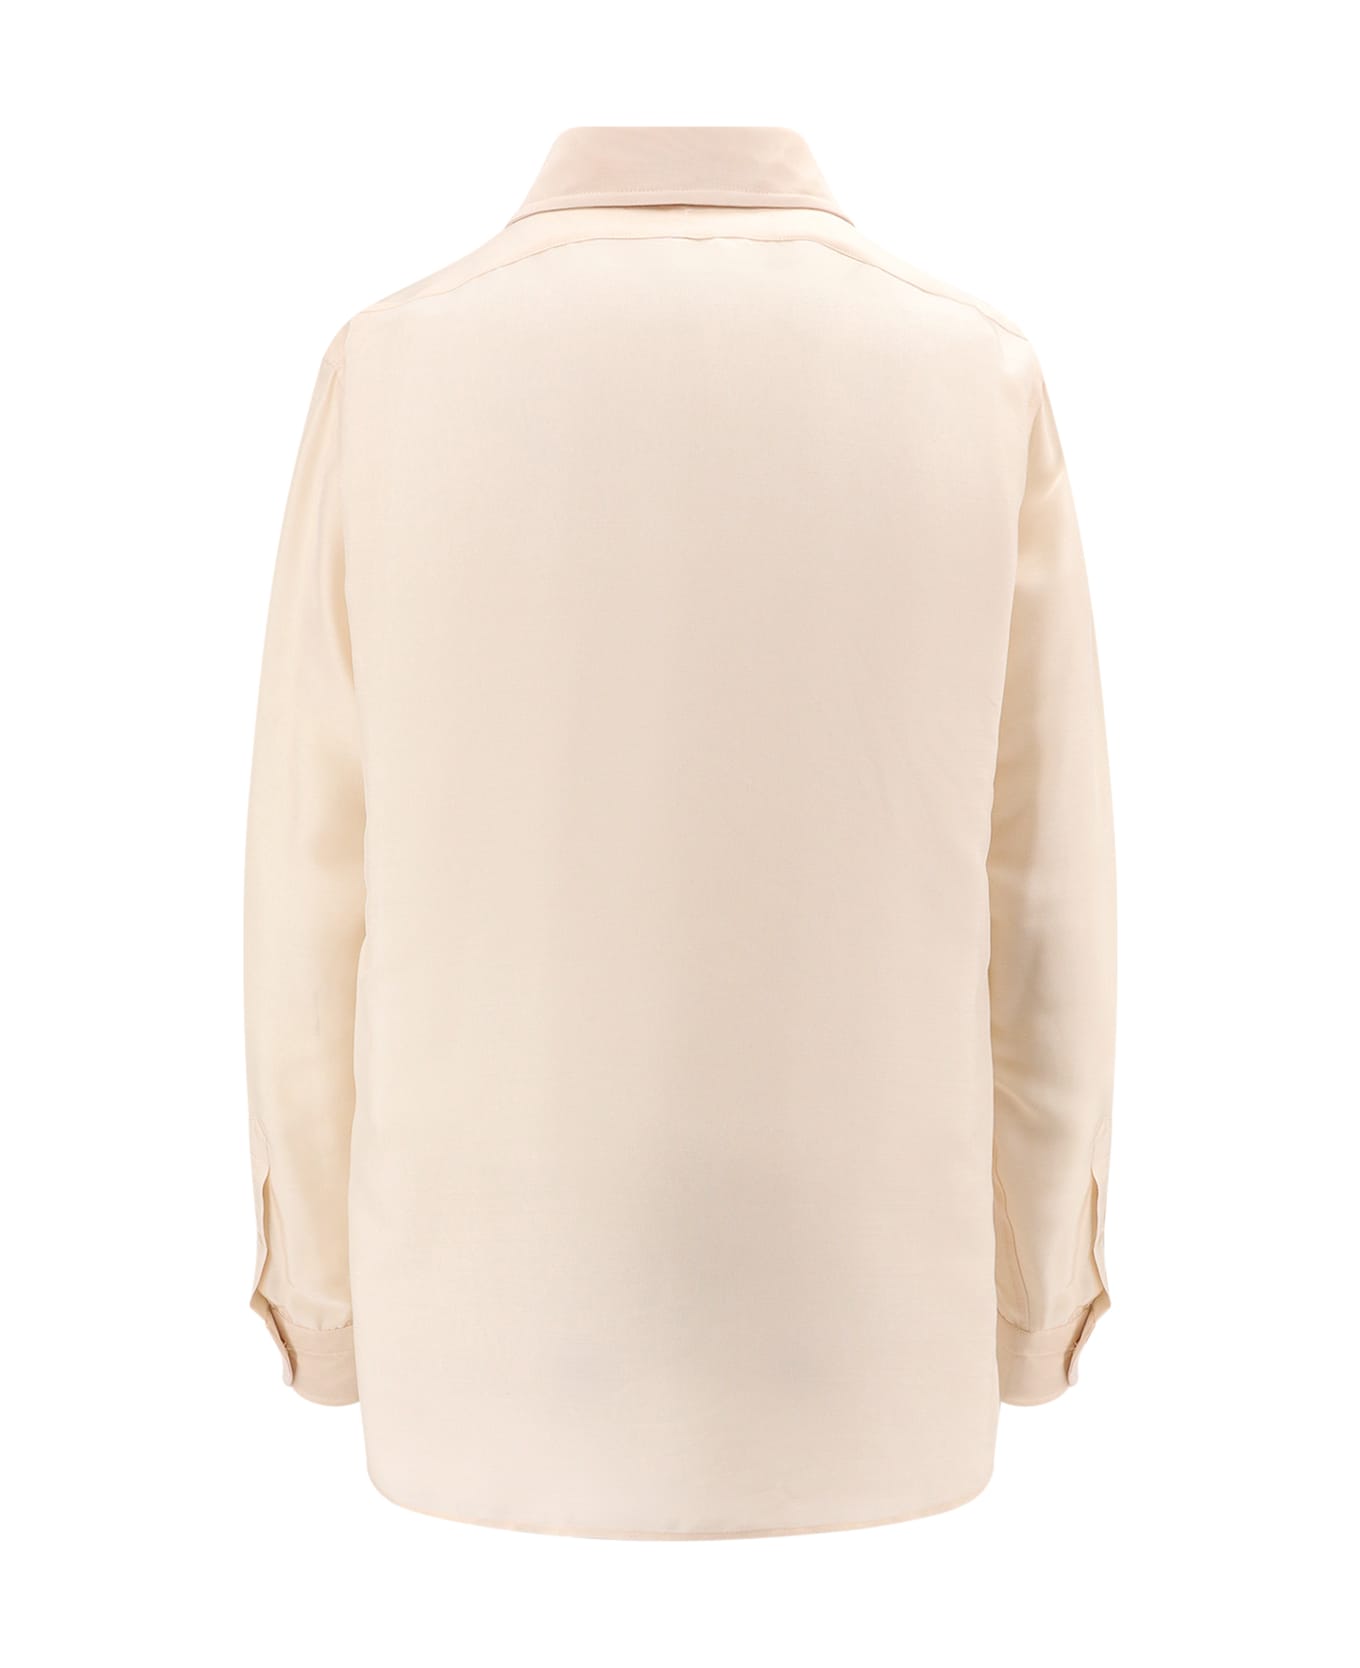 Tom Ford Shirt - Pink シャツ